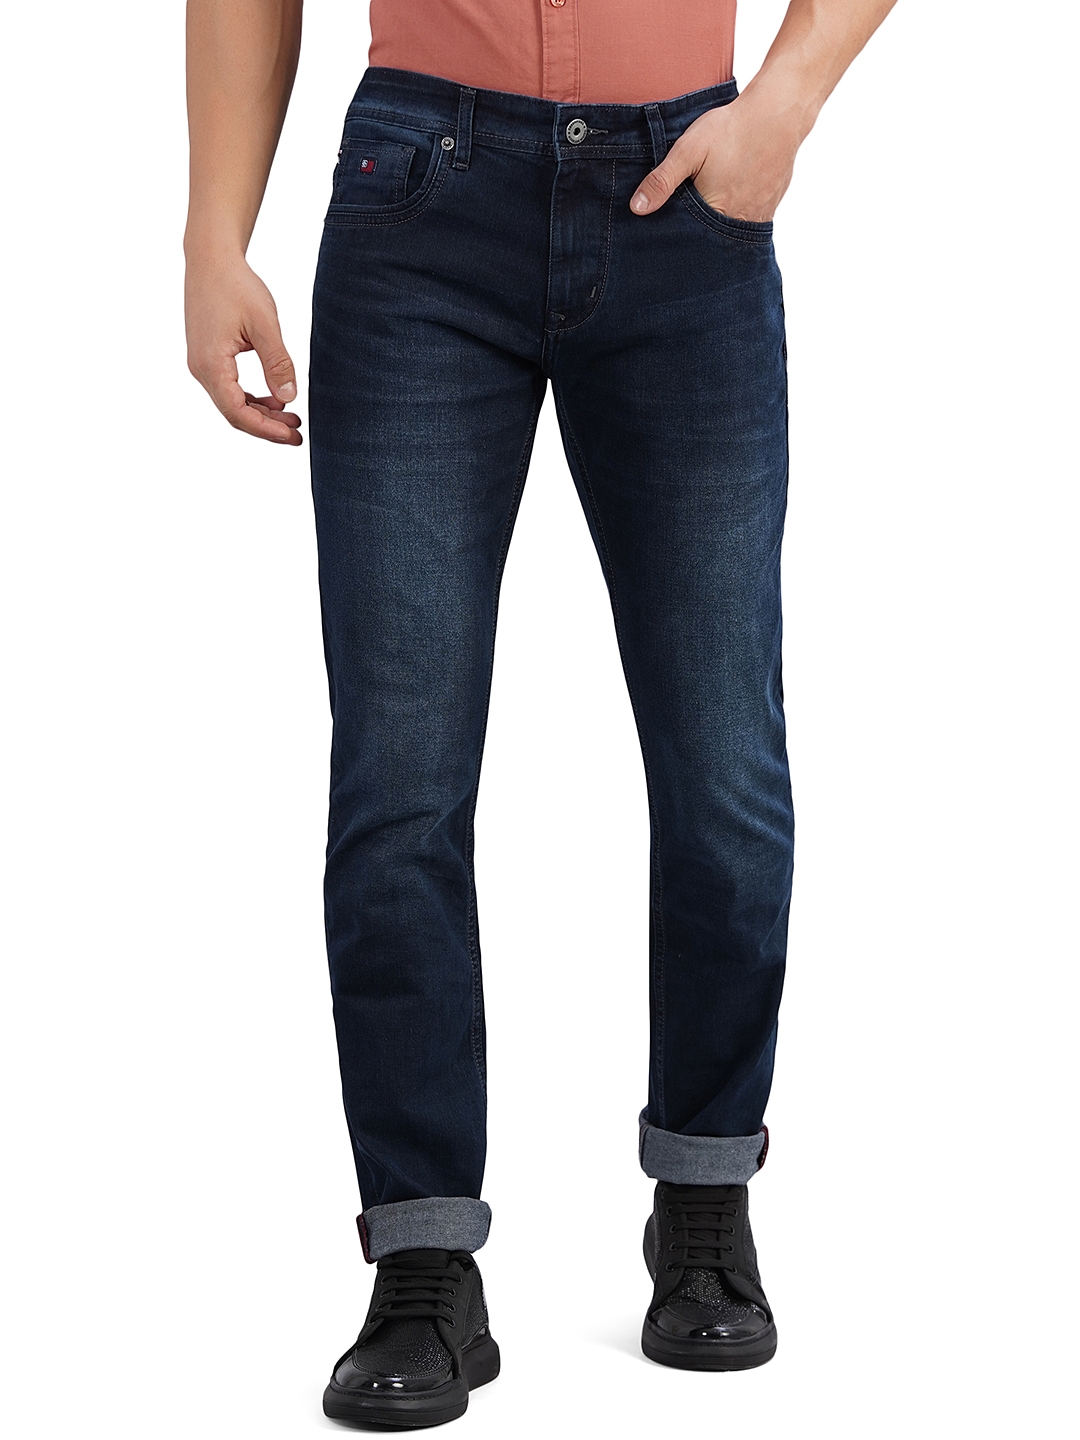 Denim Blue Washed Narrow Fit Jeans | Greenfibre